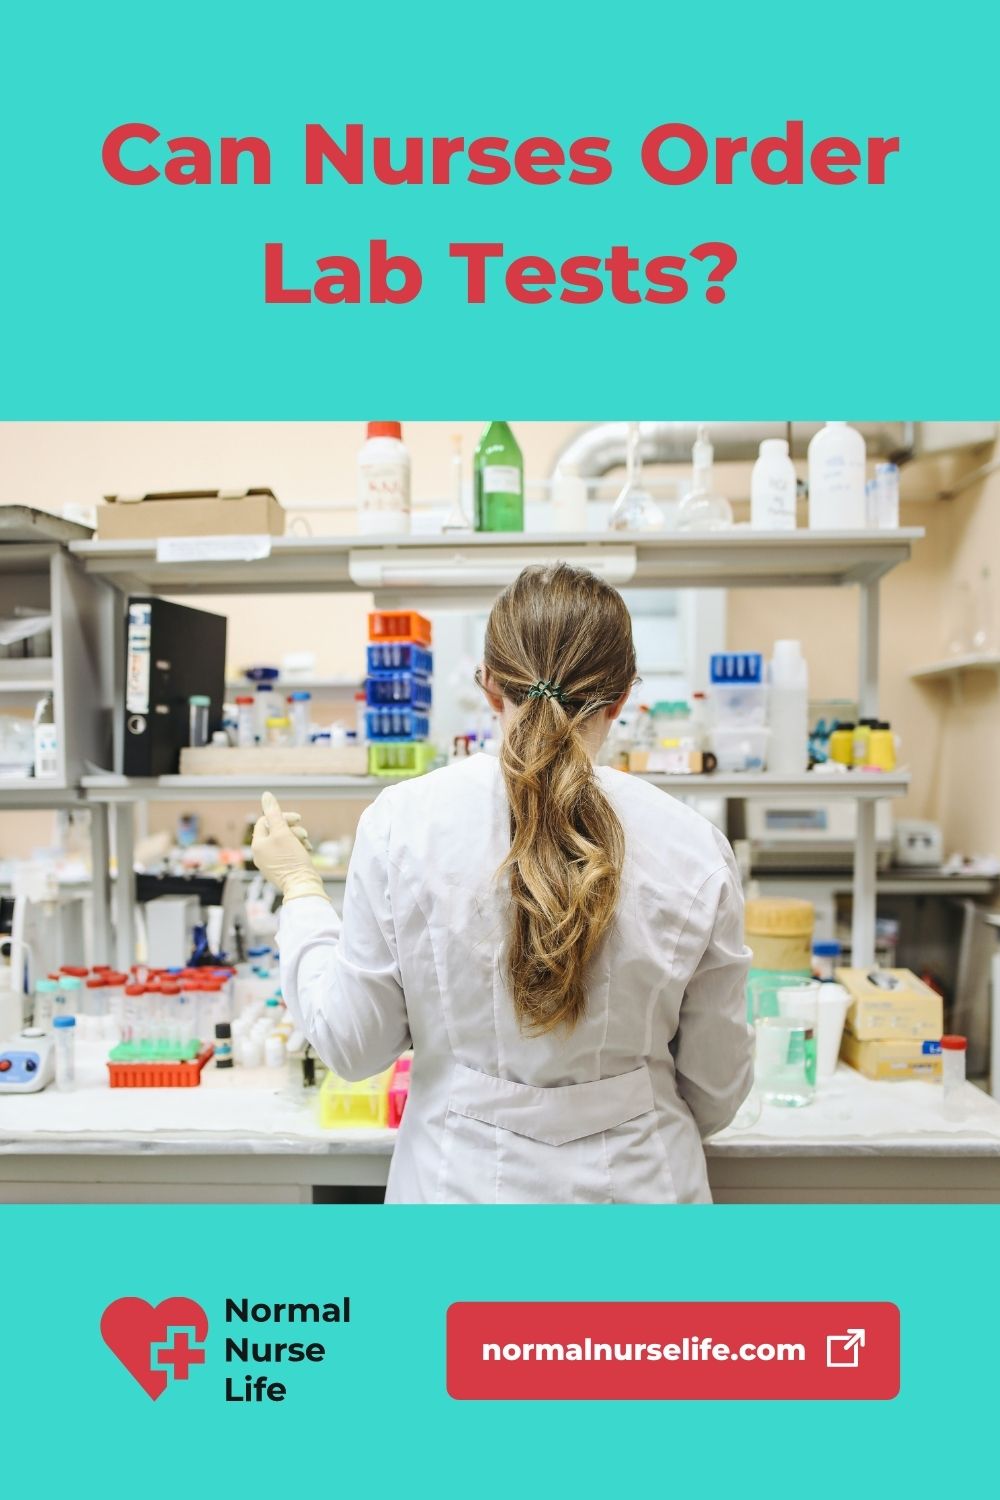 Can nurses order lab tests or not